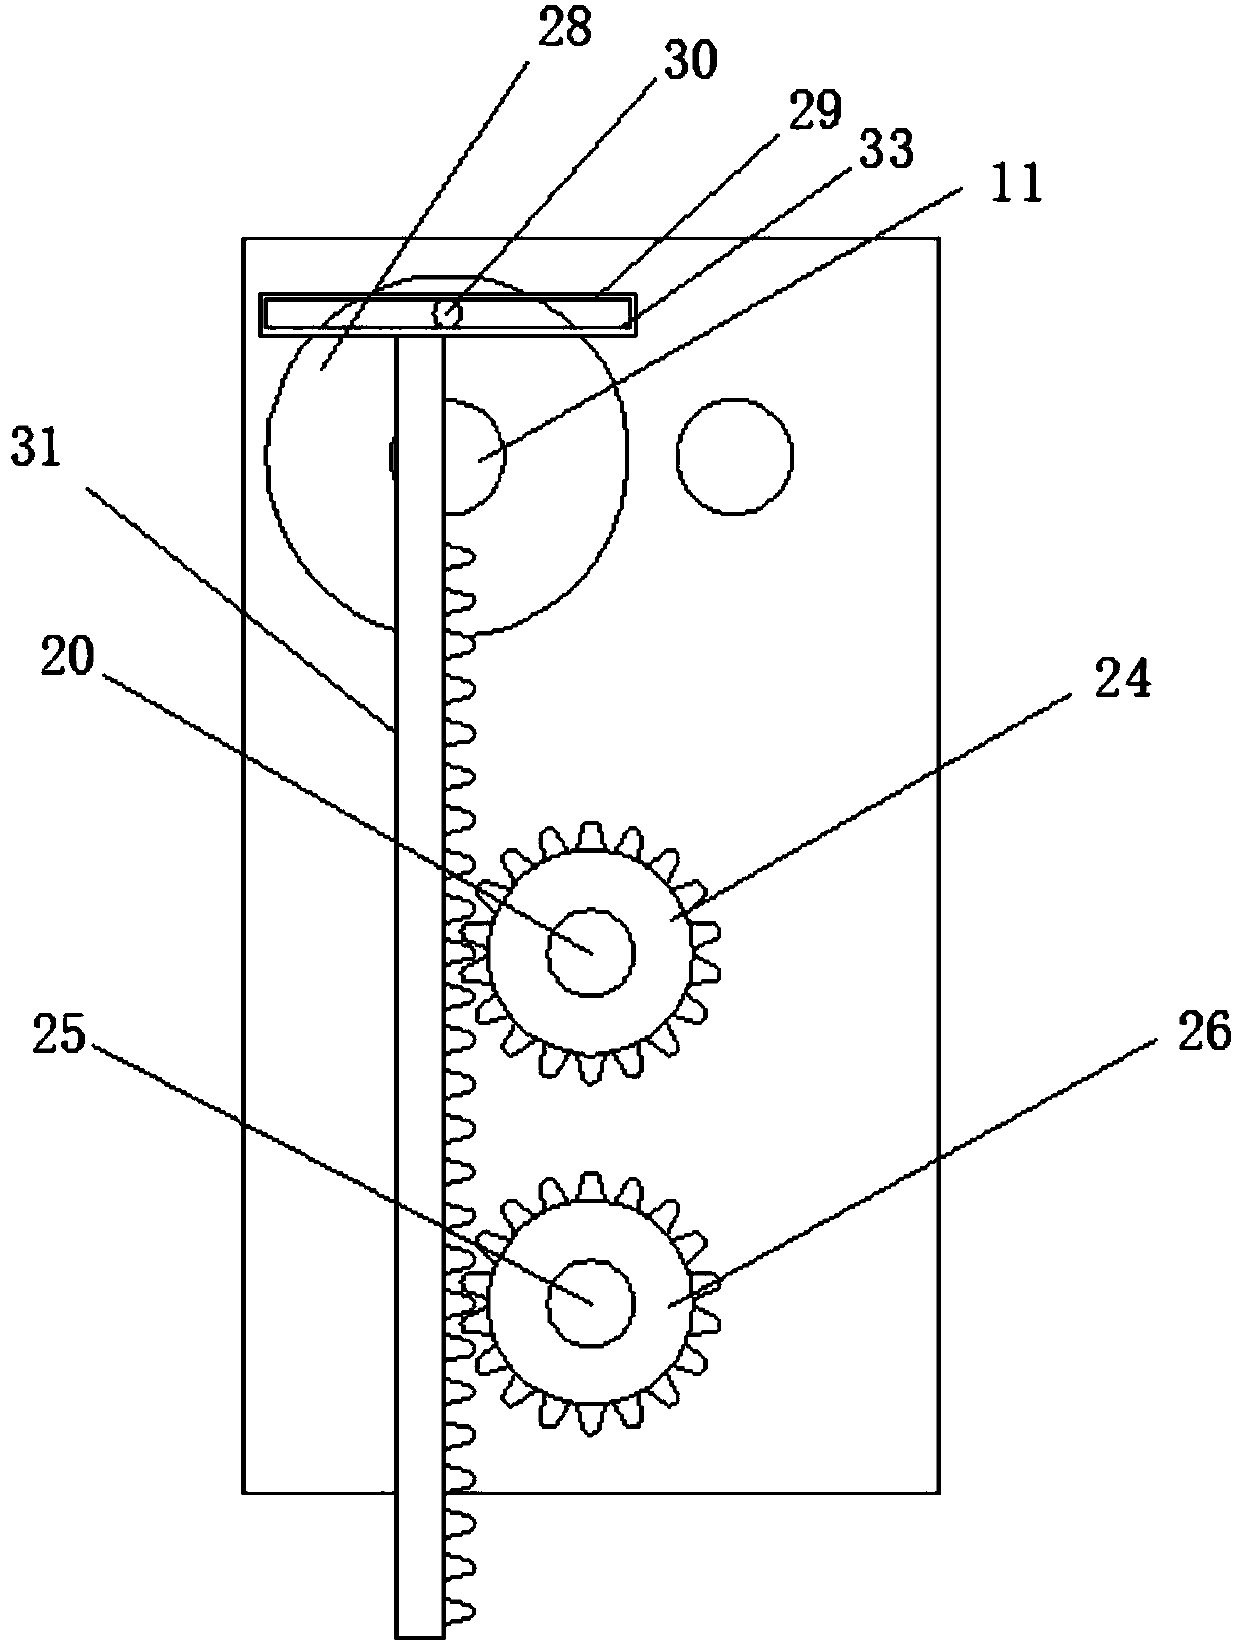 Building coating grain smashing, grinding and mixing configuration device